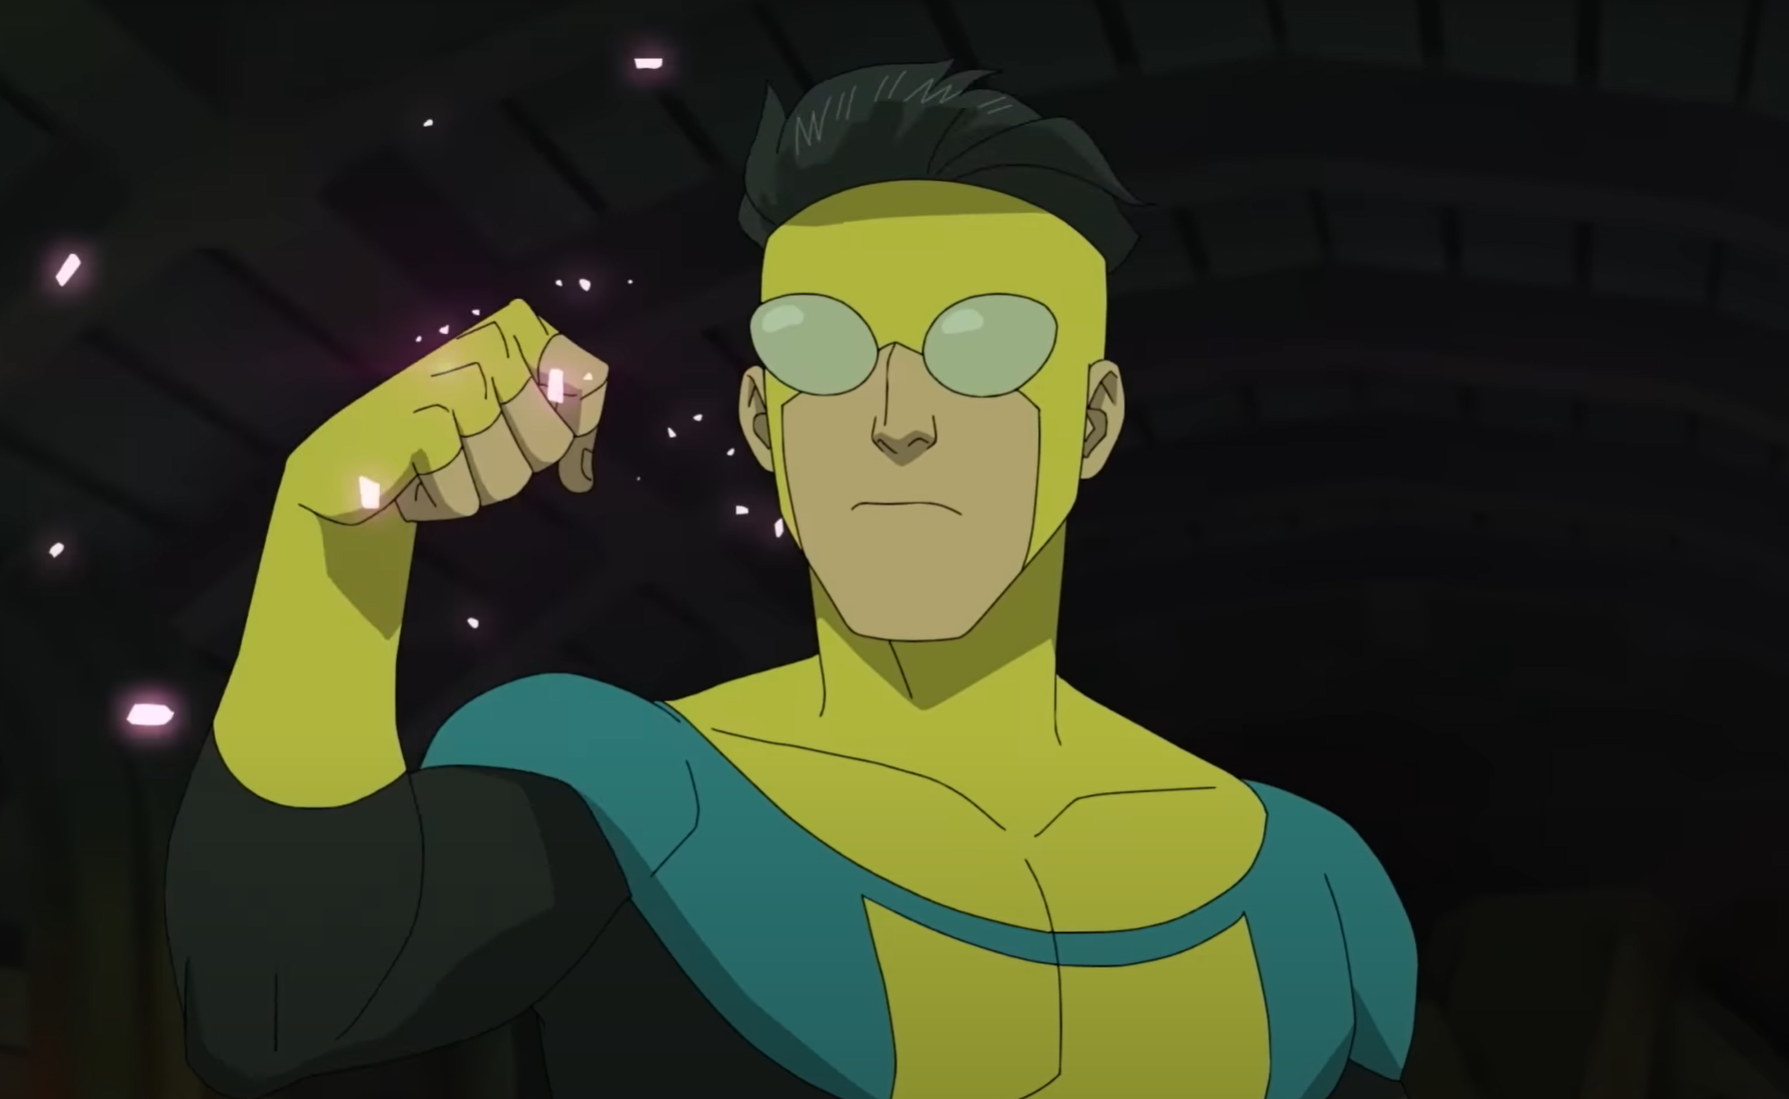 Invincible Season 2 Sets Up A Controversial Character's Debut For